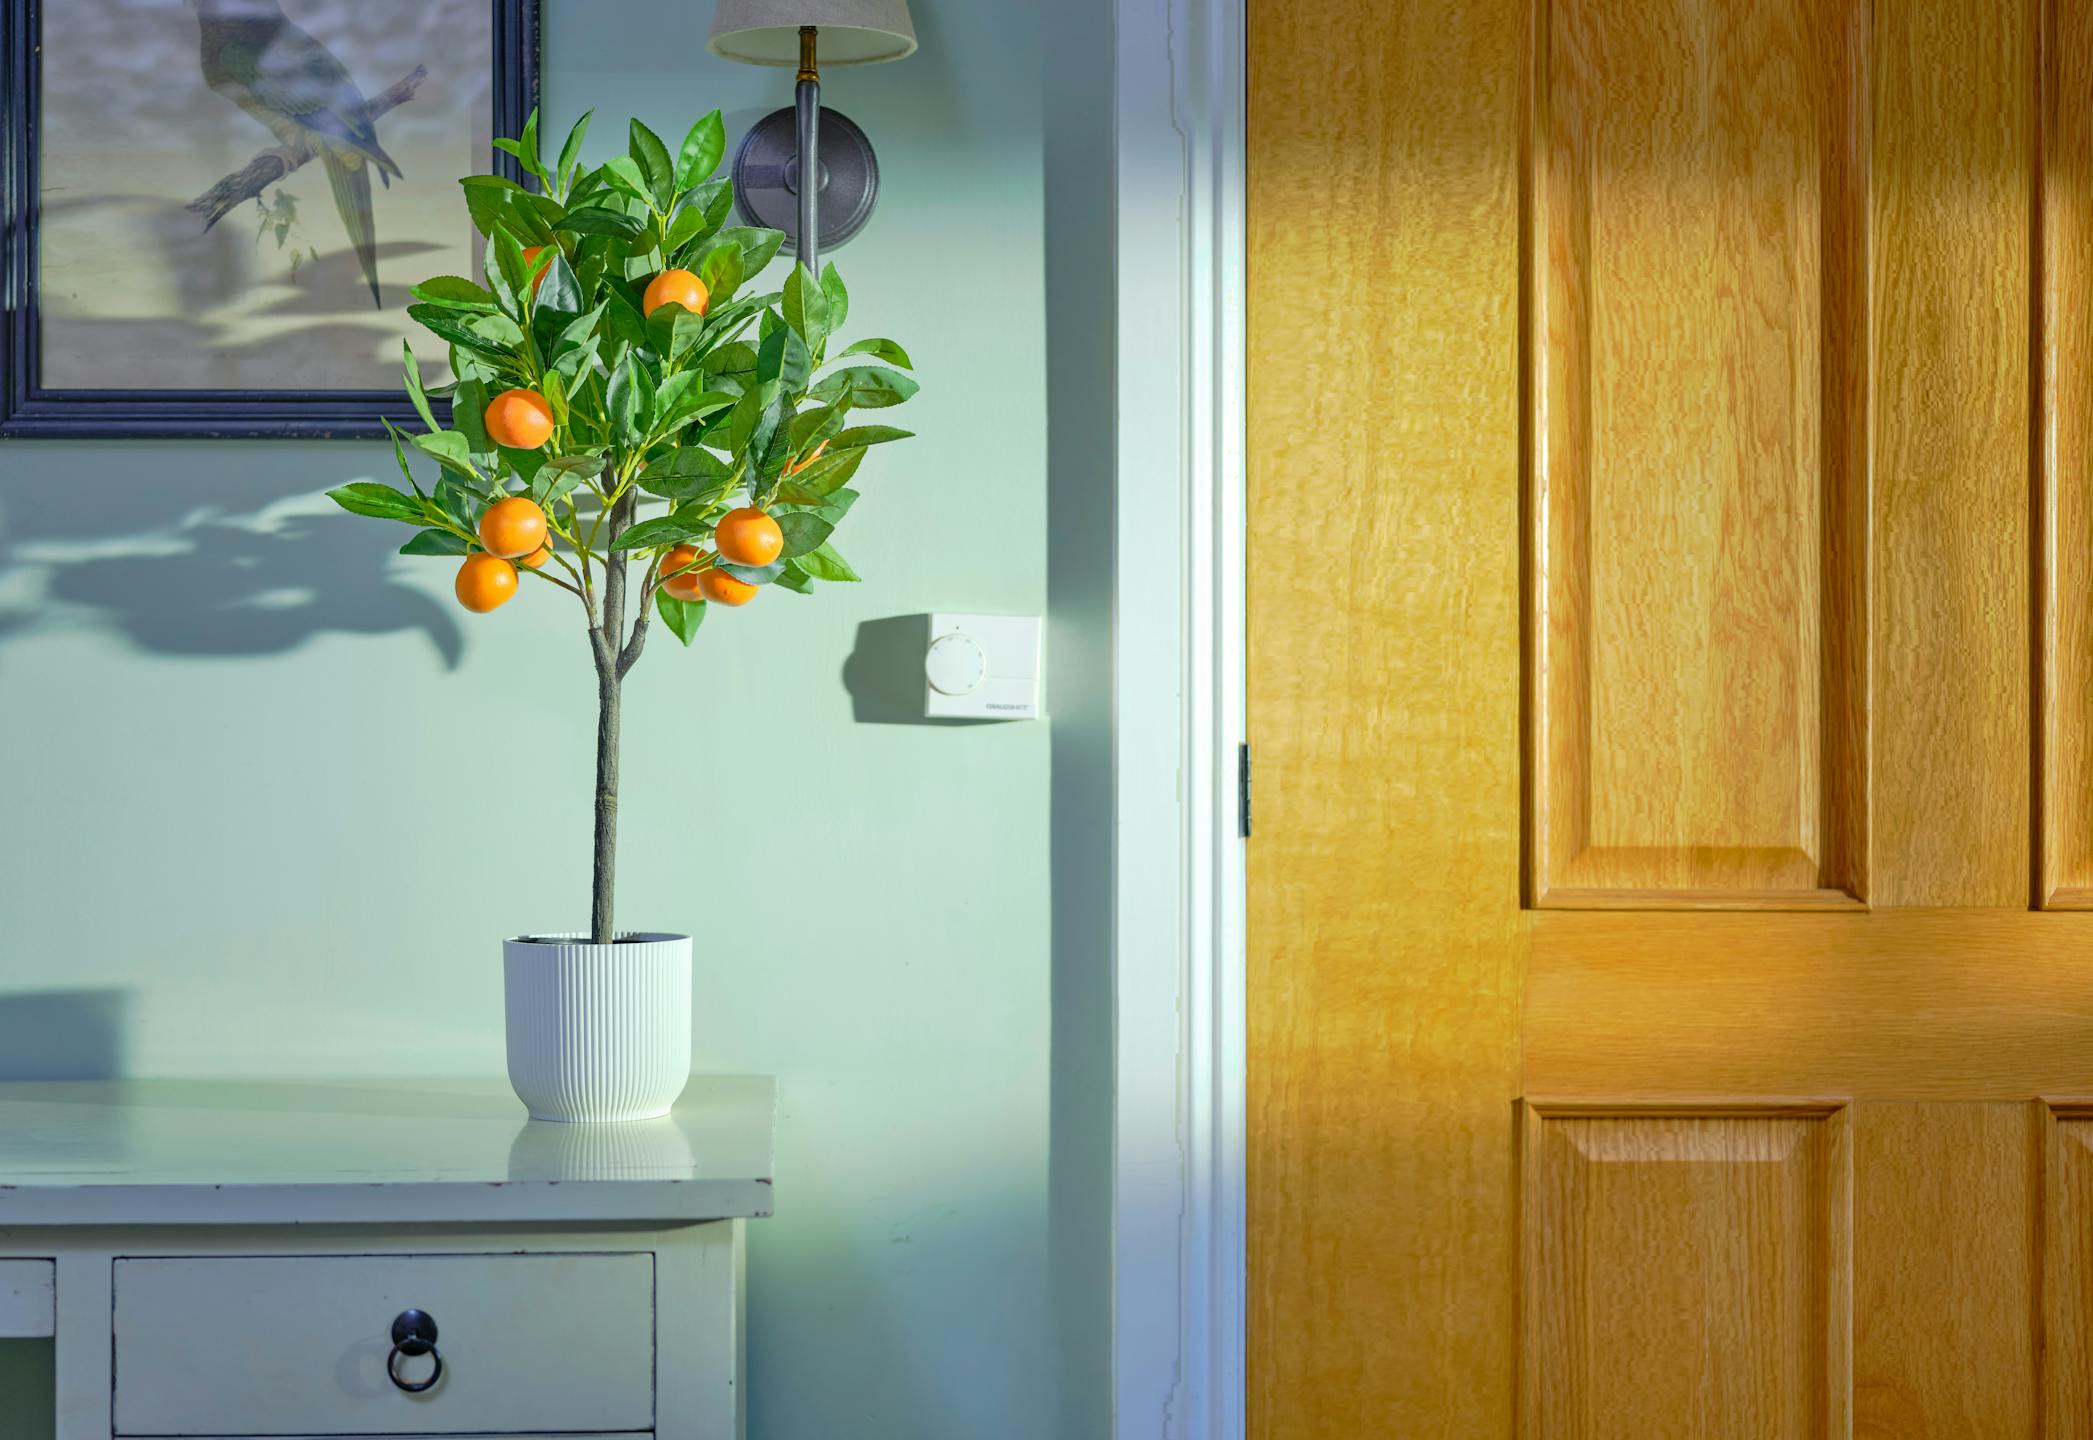 Small artificial orange tree on bedroom dressing table